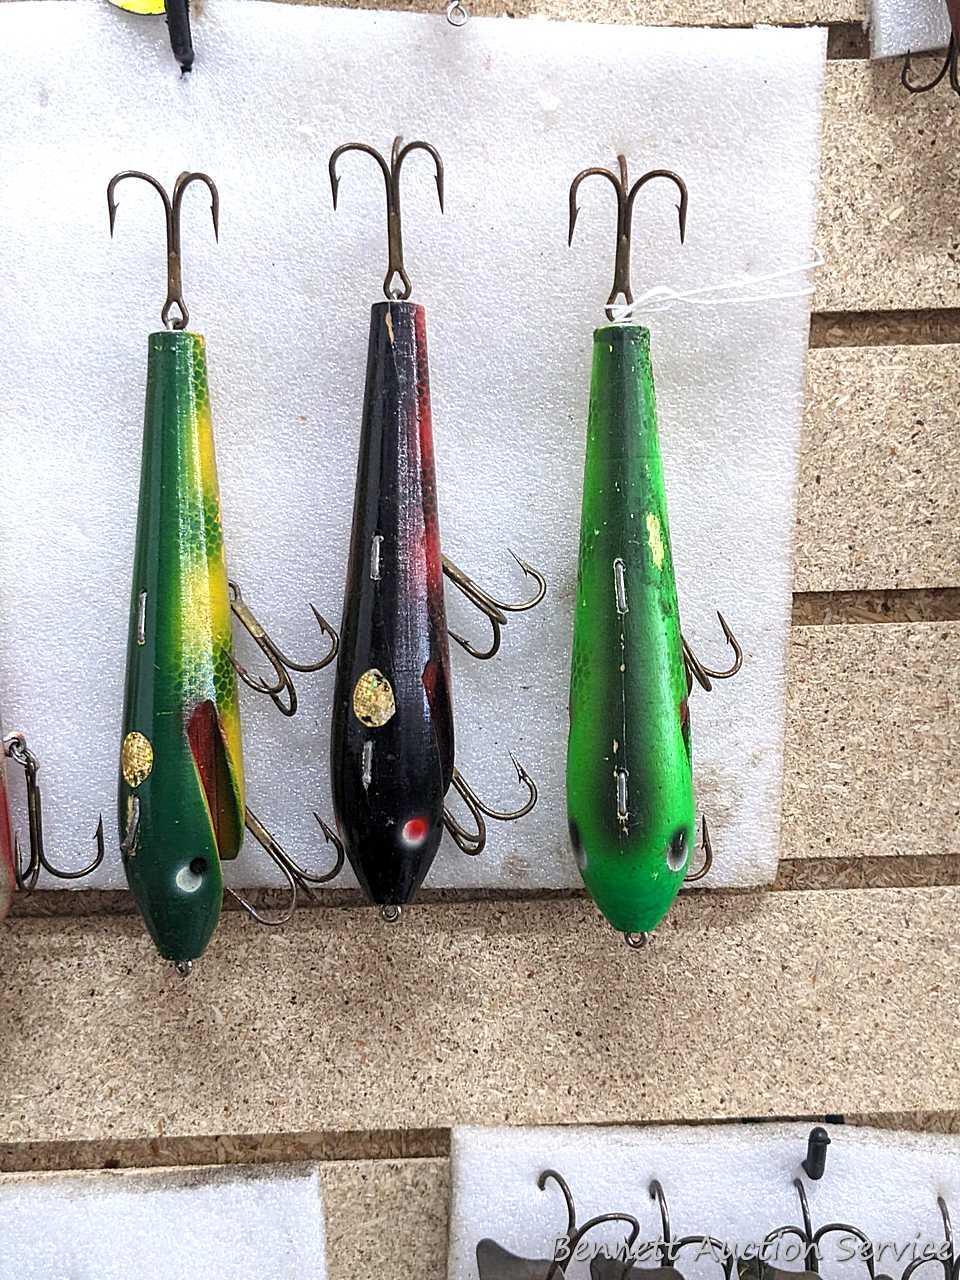 Five wooden fishing lures are all about 8 long